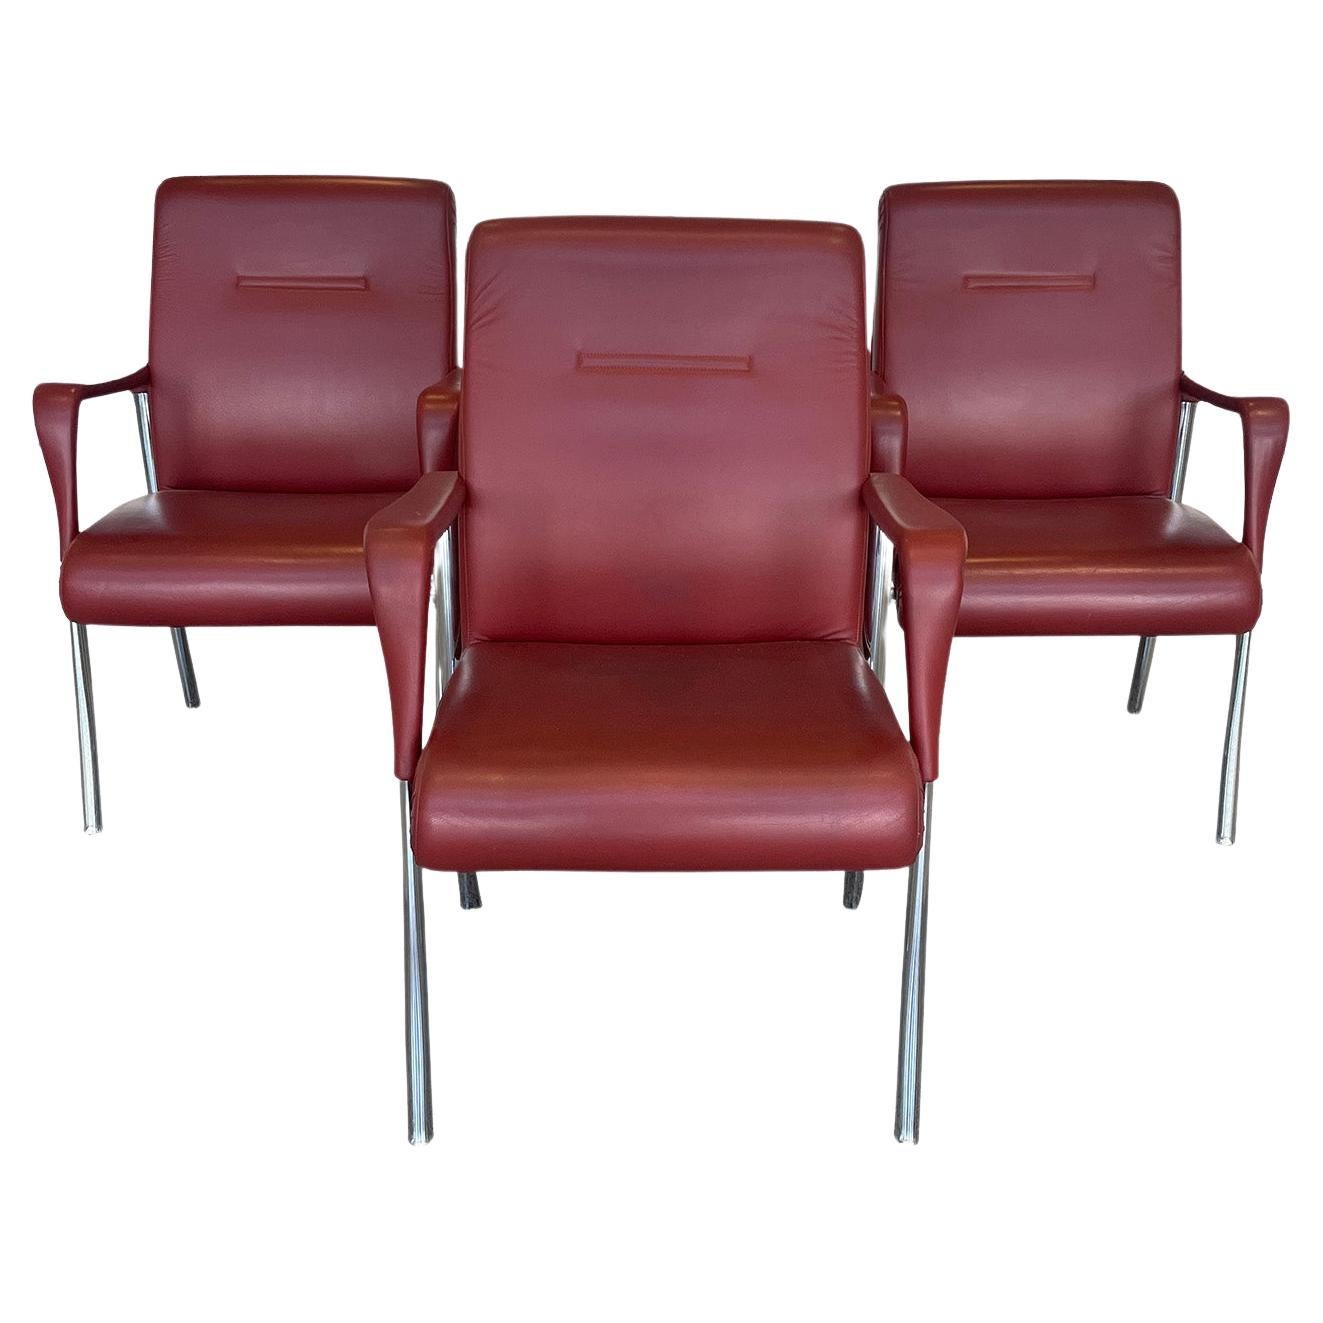 Three Leather Dining or Office Chairs by Poltrona Frau in Oxblood Red Leather